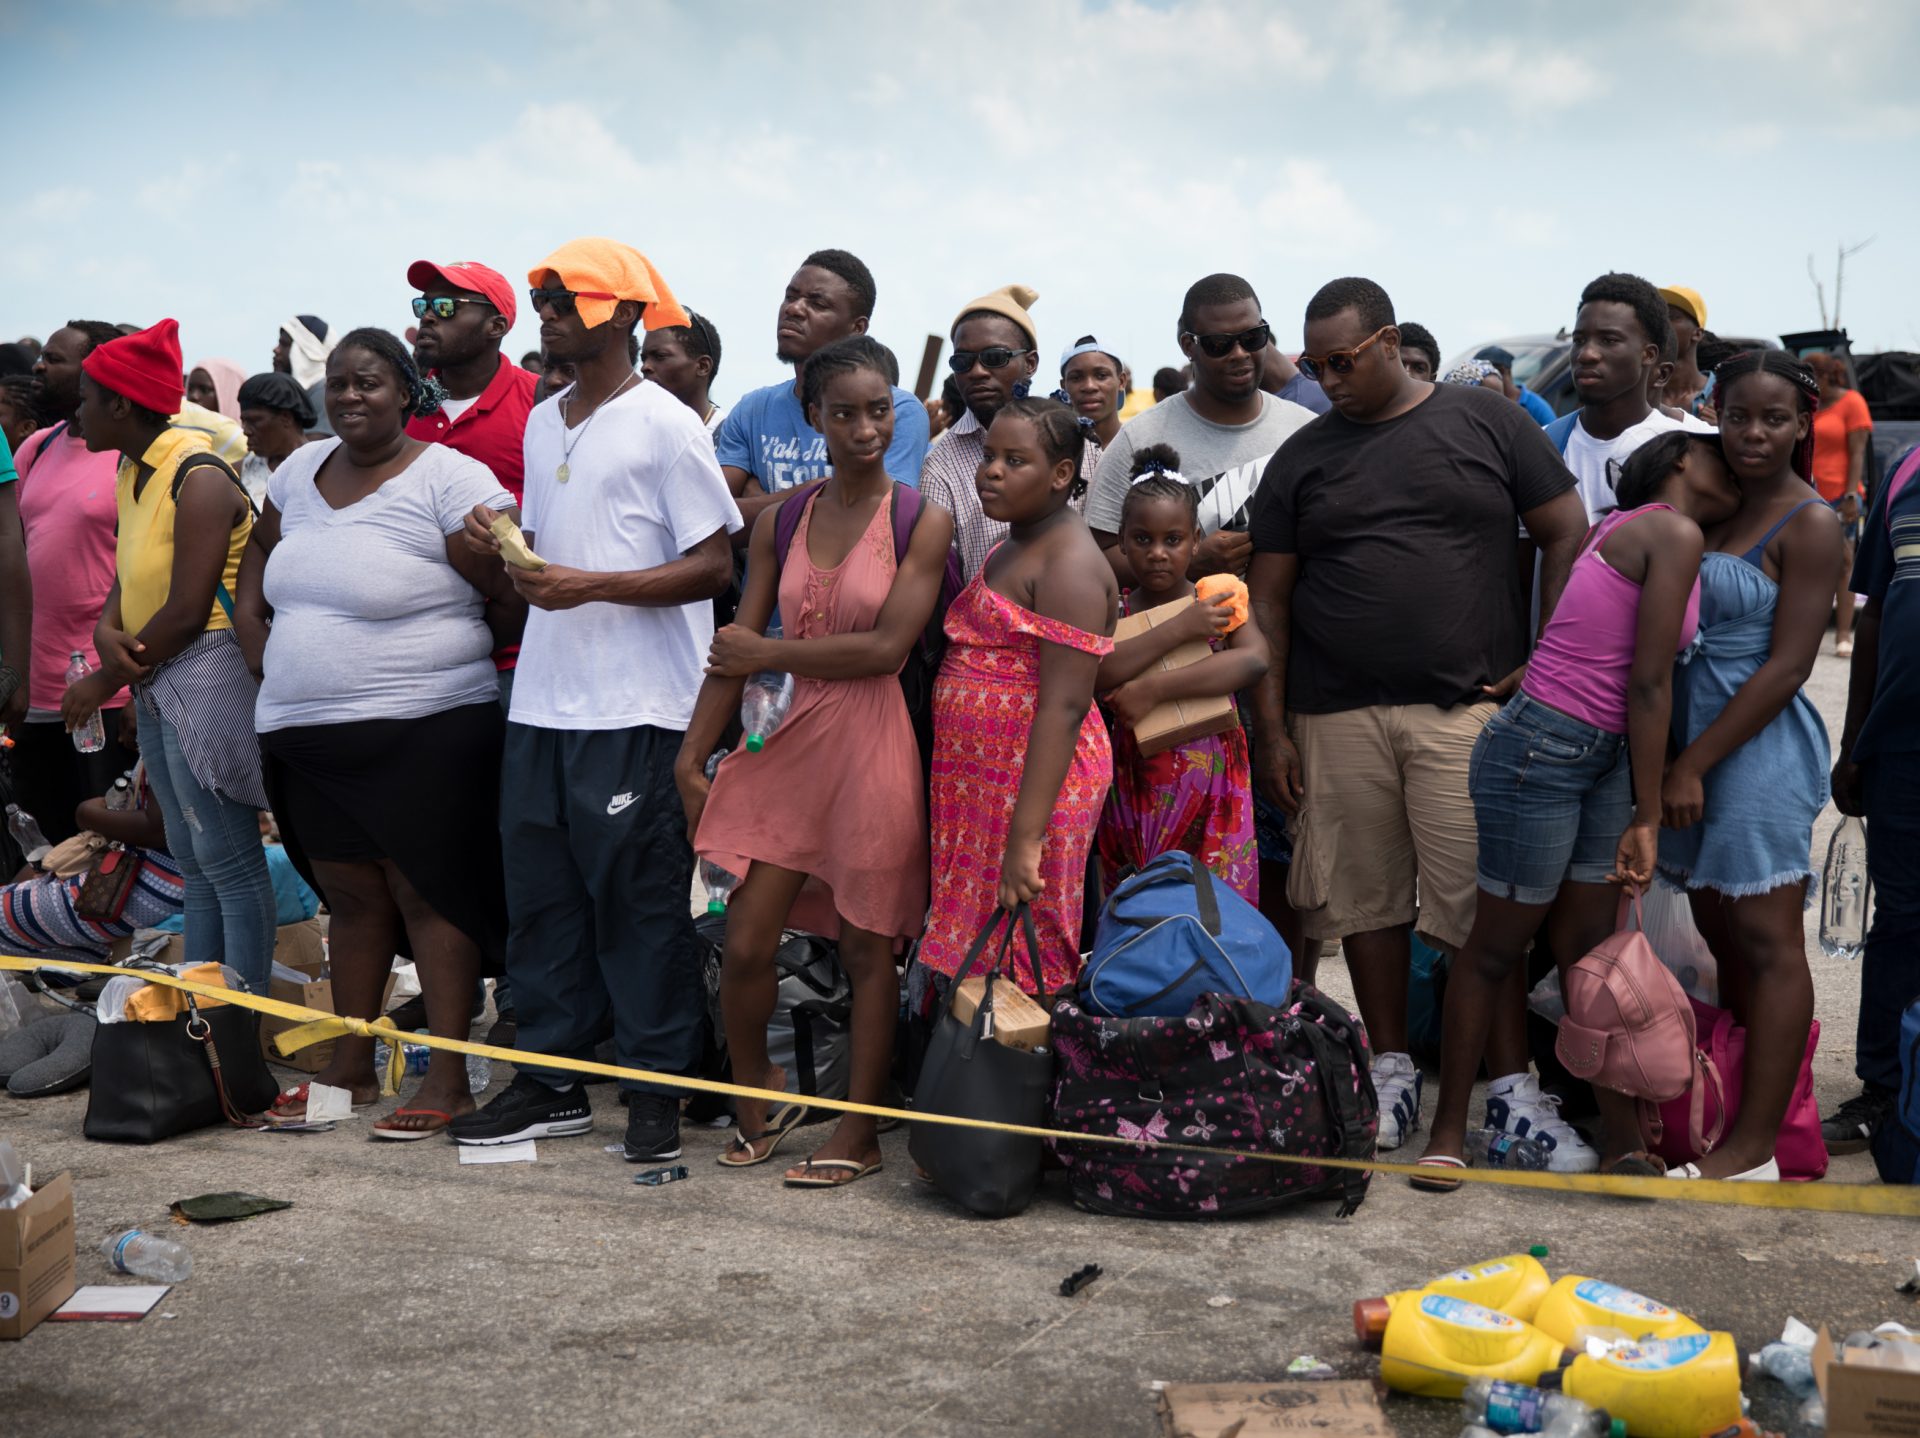 Hundreds wait at the port of Marsh Harbour in the hopes of boarding a boat to Nassau after the town on Abaco in the Bahamas was decimated by Hurricane Dorian.